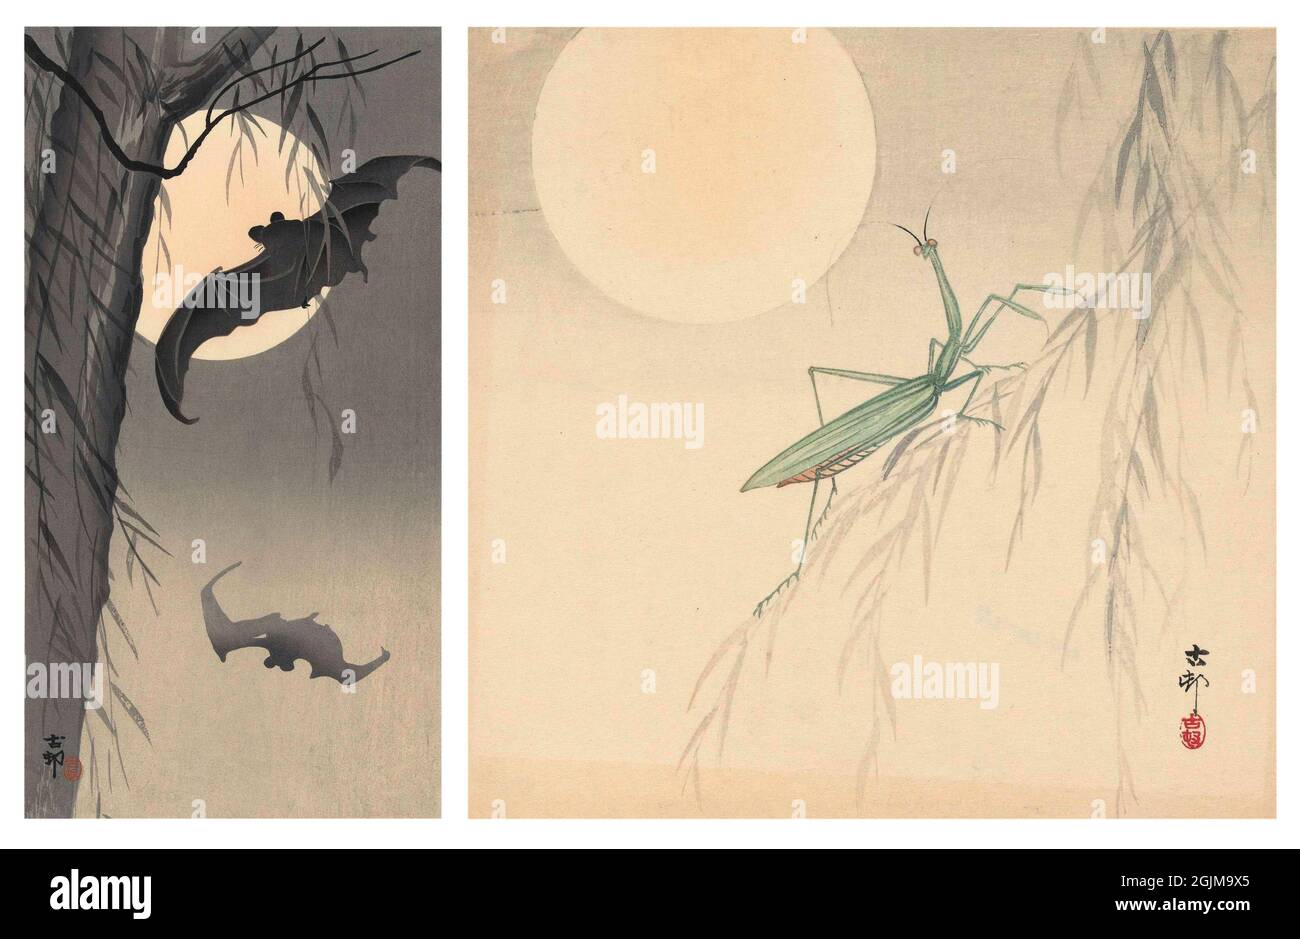 Selection of 2 Japanese painted woodcuts  Left: Two flying bats at full moon; willow tree on the left. Right (1900-1936): Praying mantis on a willow branch at full moon.  Unique optimised and enhanced arrangement of two historical Japanese woodcut illustrations. Stock Photo